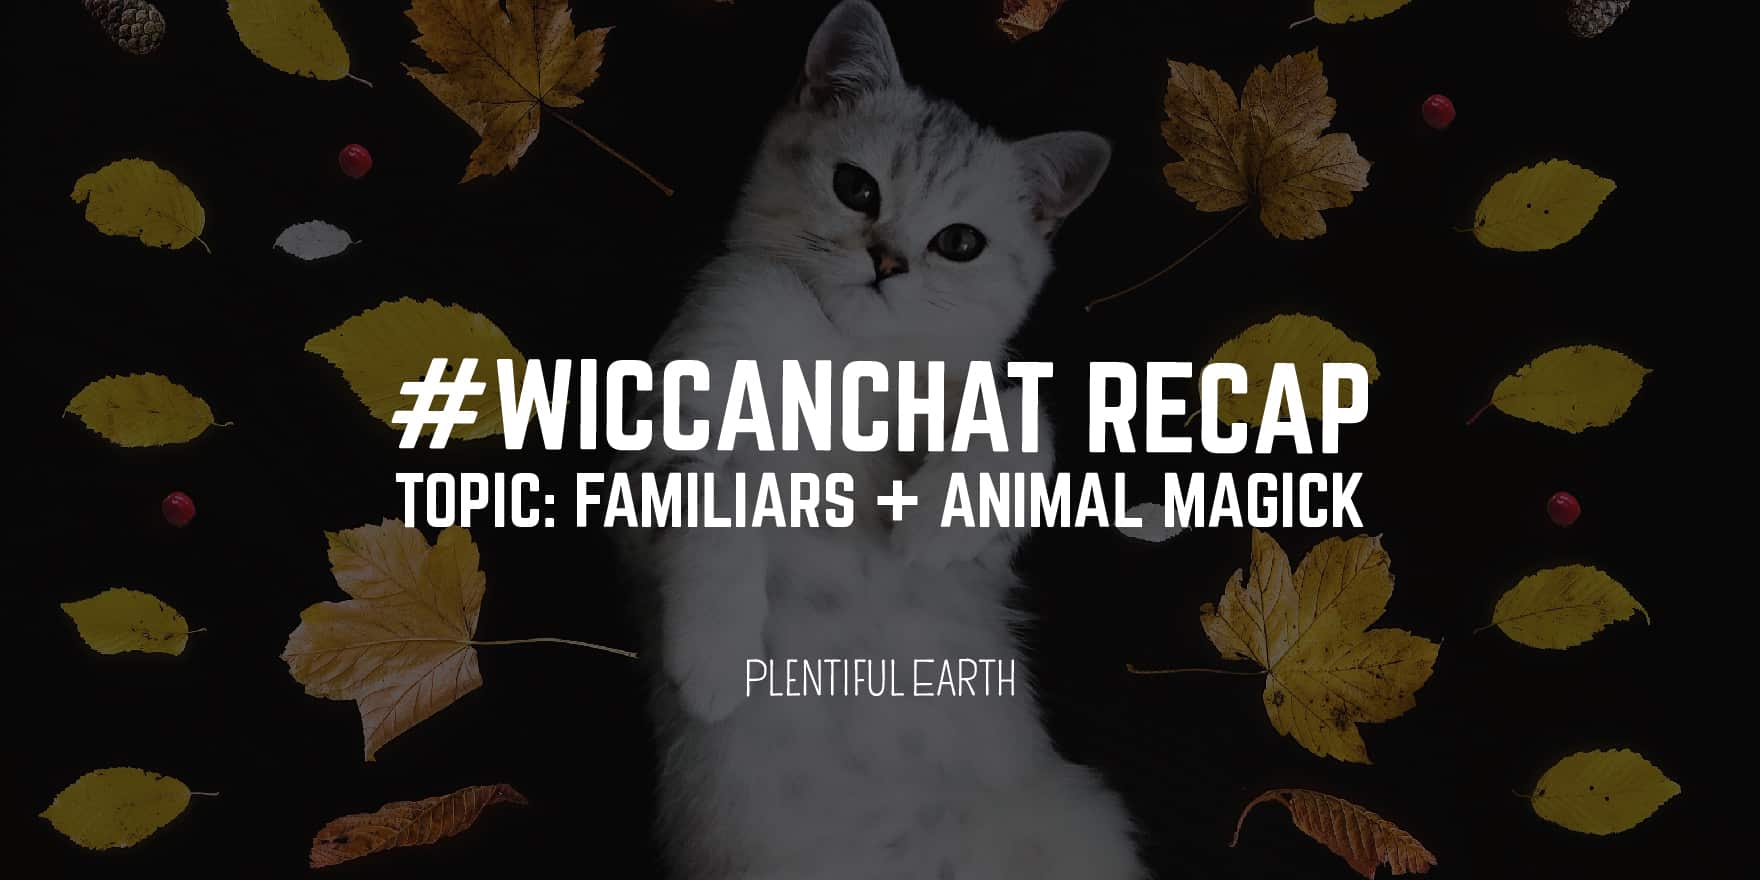 A cute white cat surrounded by autumn leaves, with the text "#wiccanchat recap - topic: familiars + animal magick" by Plentiful Earth, your favorite metaphysical shop.